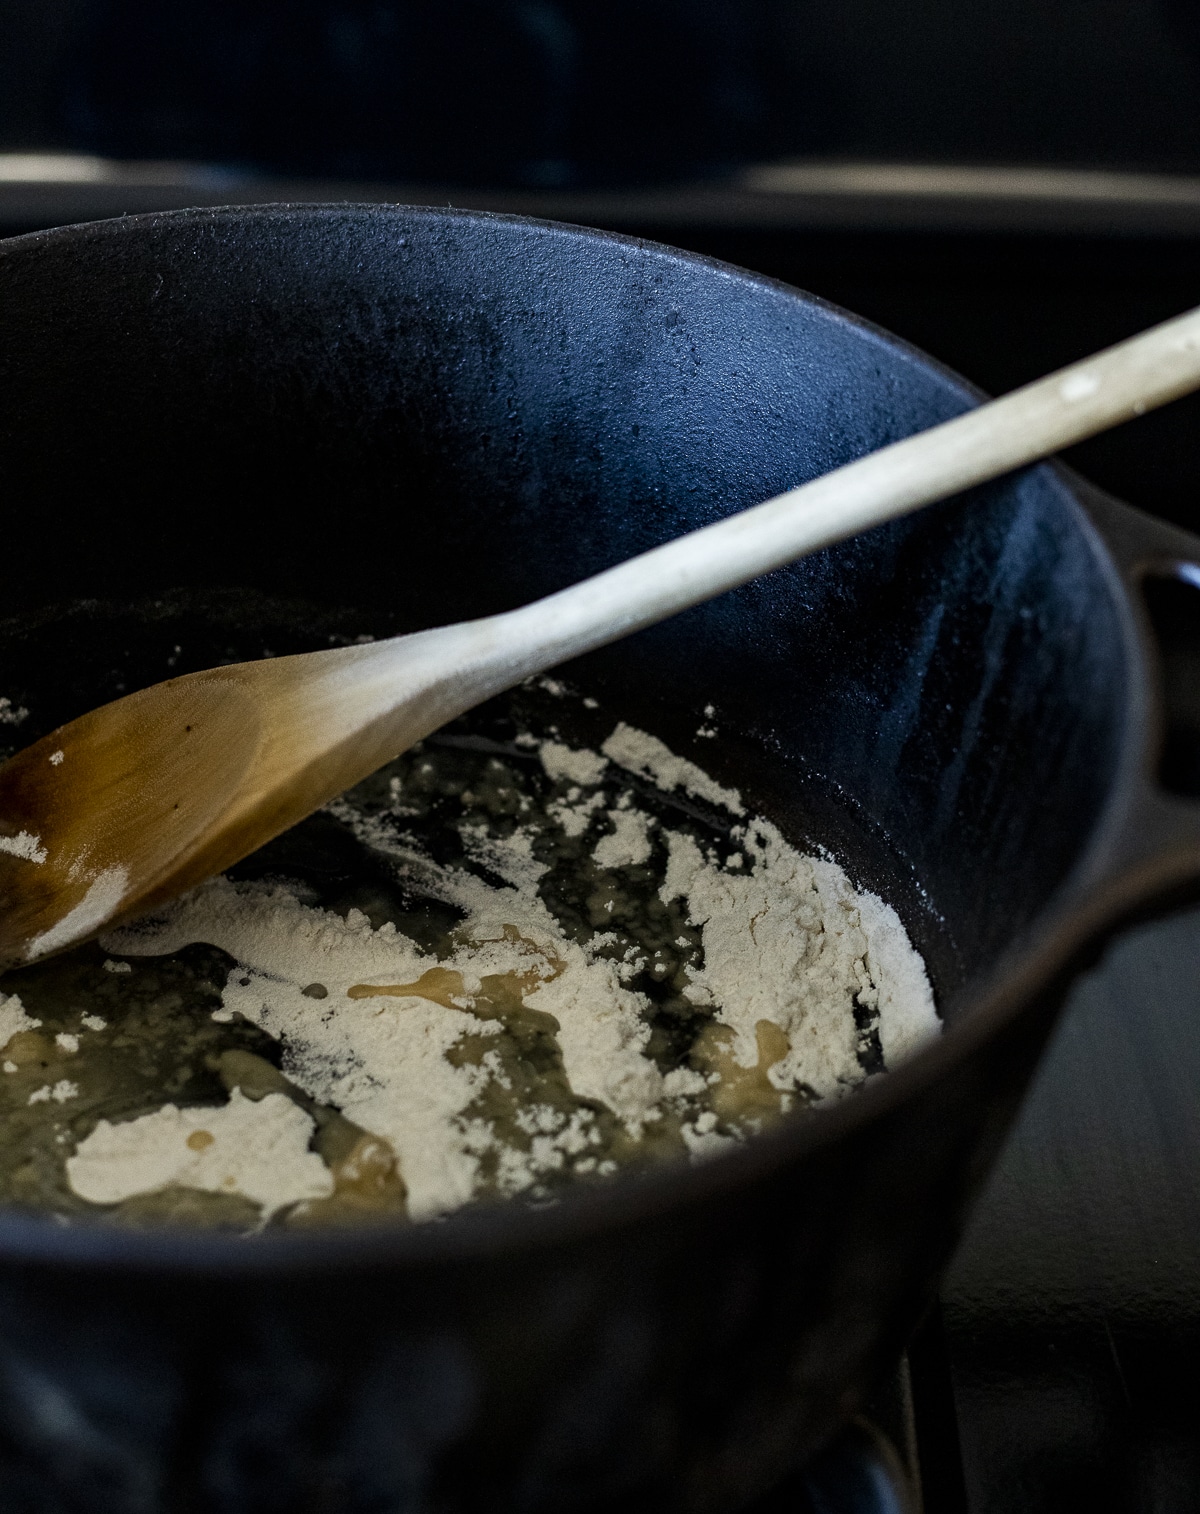 Roux being stirred together with a wooden spoon in a pot.